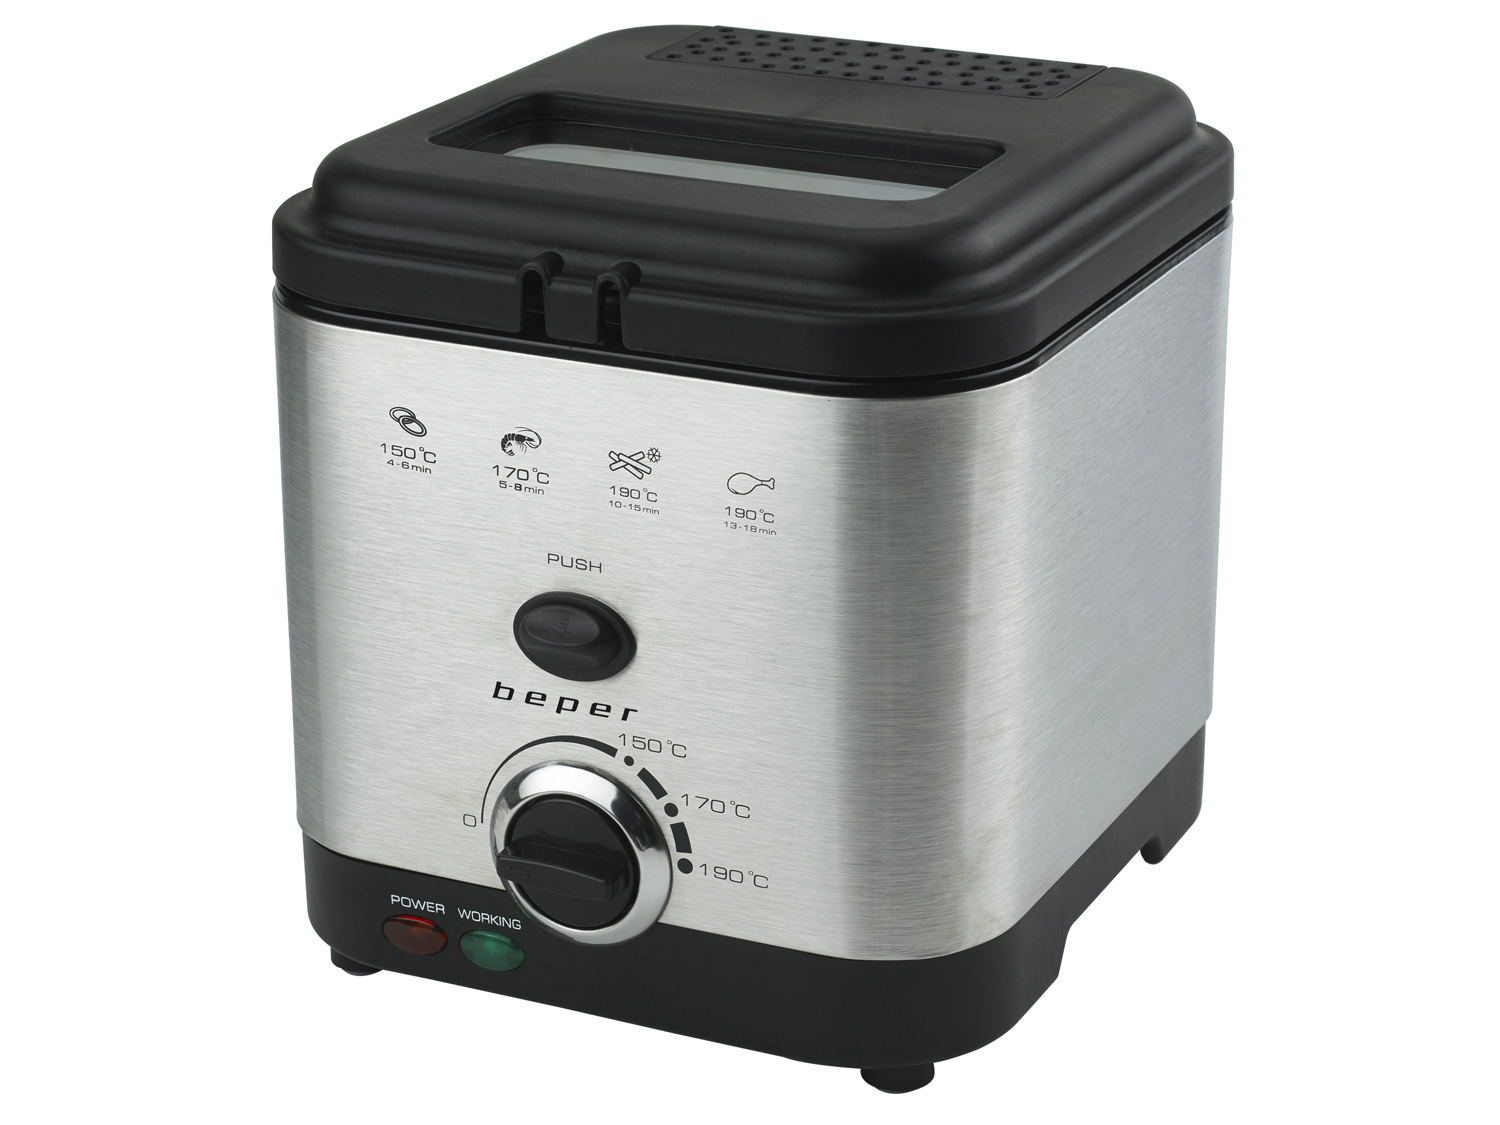 BC.352, deep fryer, 1.5L, 900W, stainless steel